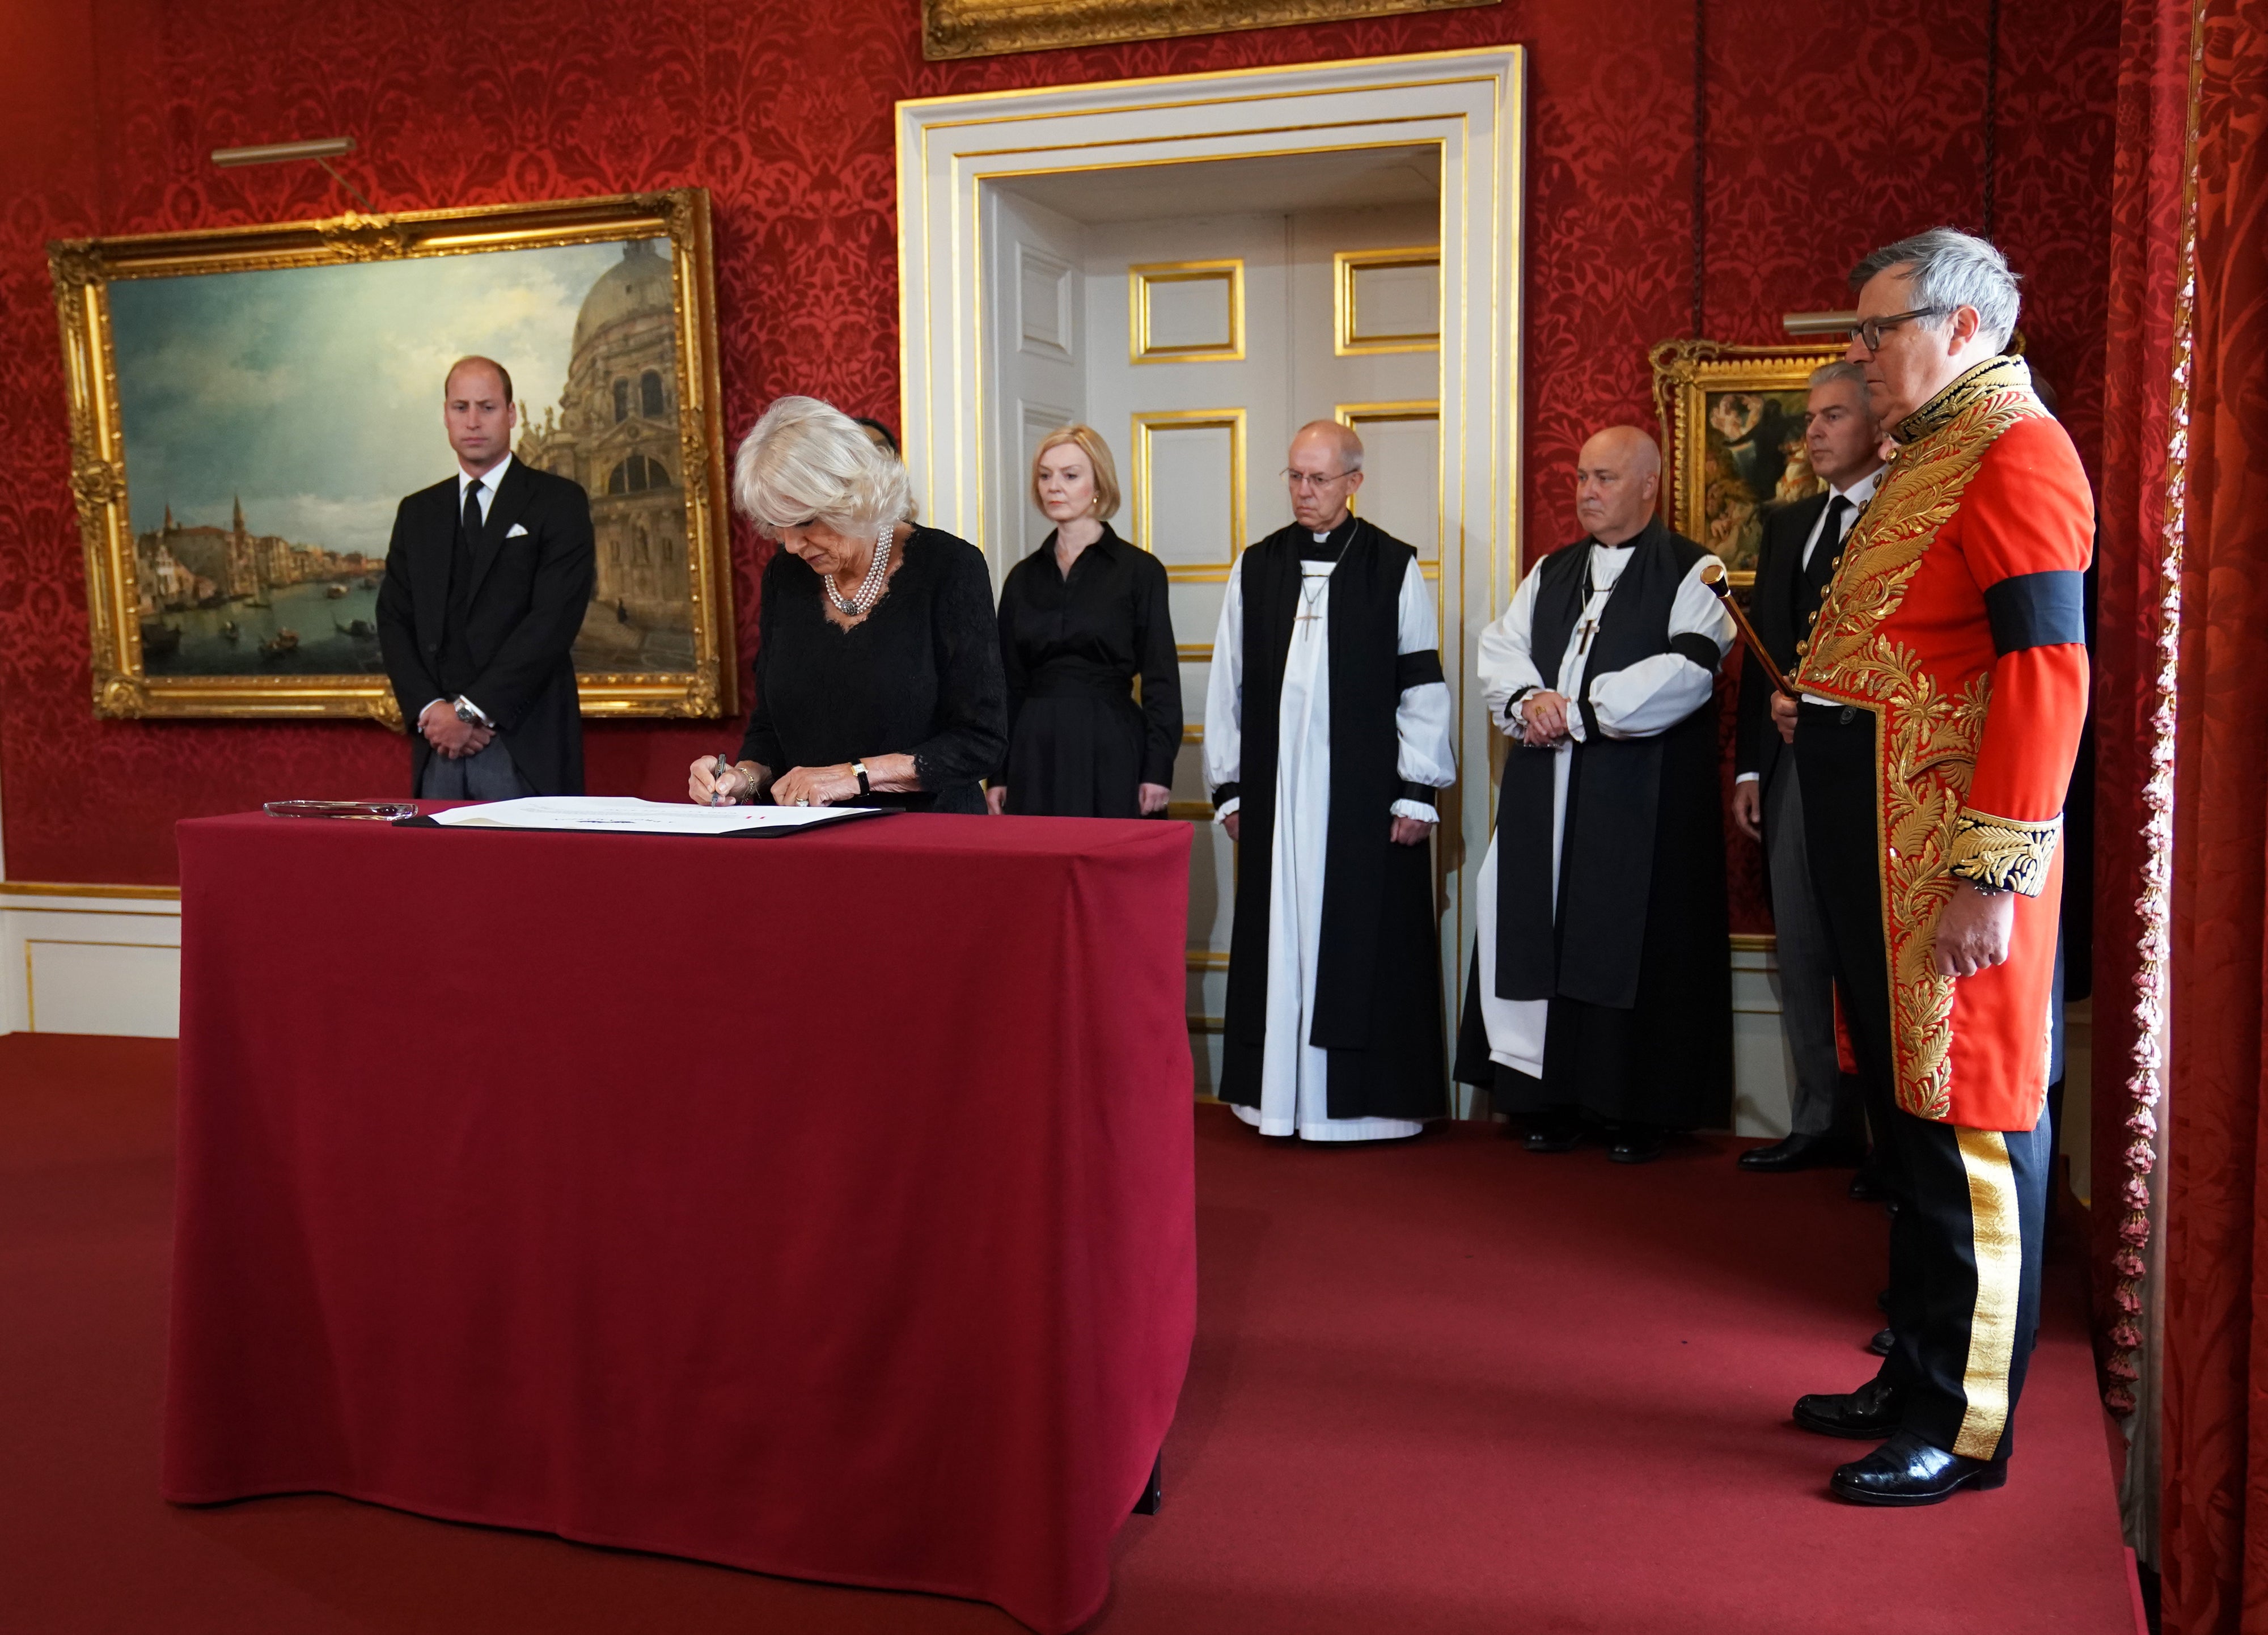 The Duke of Norfolk (far right) at the Accession Council ceremony